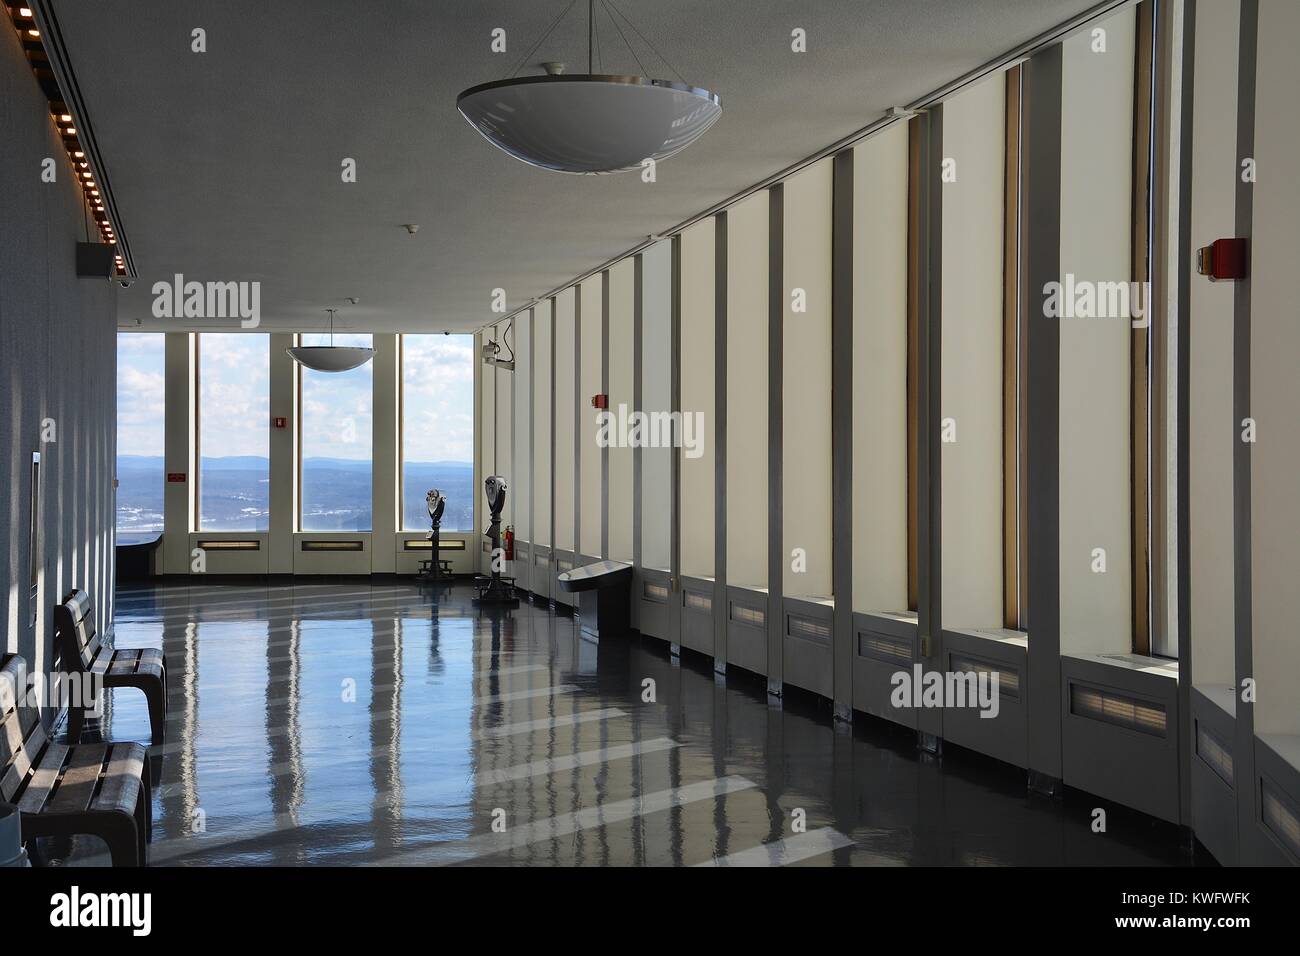 Interior of the Corning Tower 42nd floor Observation Deck at the Capitol Plaza in New York State's capital Albany, Upstate NY, USA Stock Photo